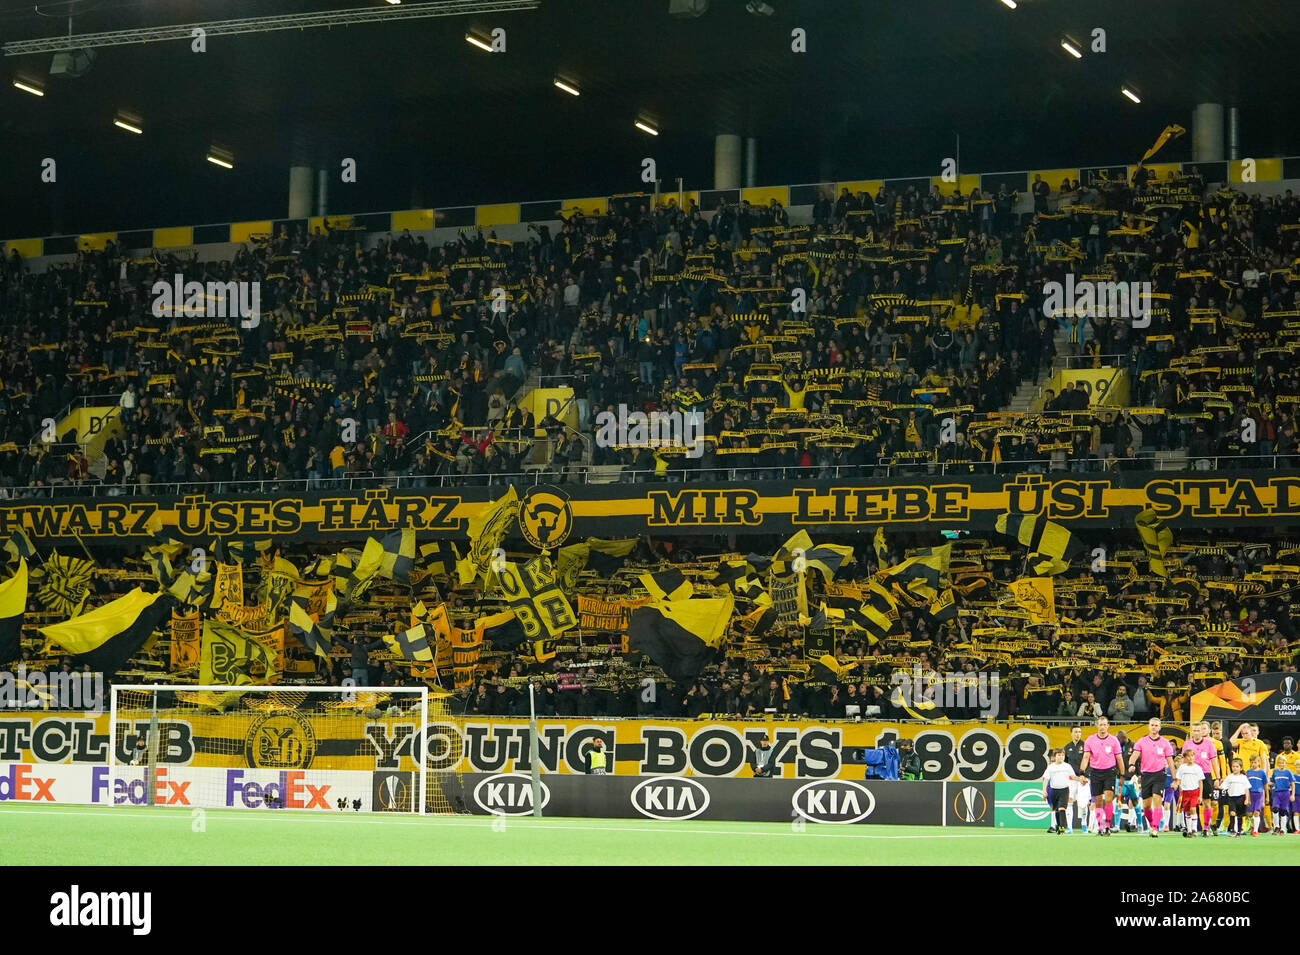 BERNE, SWITZERLAND - OCTOBER 24: Fans of BSC Young Boys cheering on their team during the Europa League Group G Stage football match between Young Boys and Feyenoord Rotterdam at Stade de Suisse on October 24, 2019 in Berne, Switzerland (Photo by Daniela Porcelli/SPP) Stock Photo